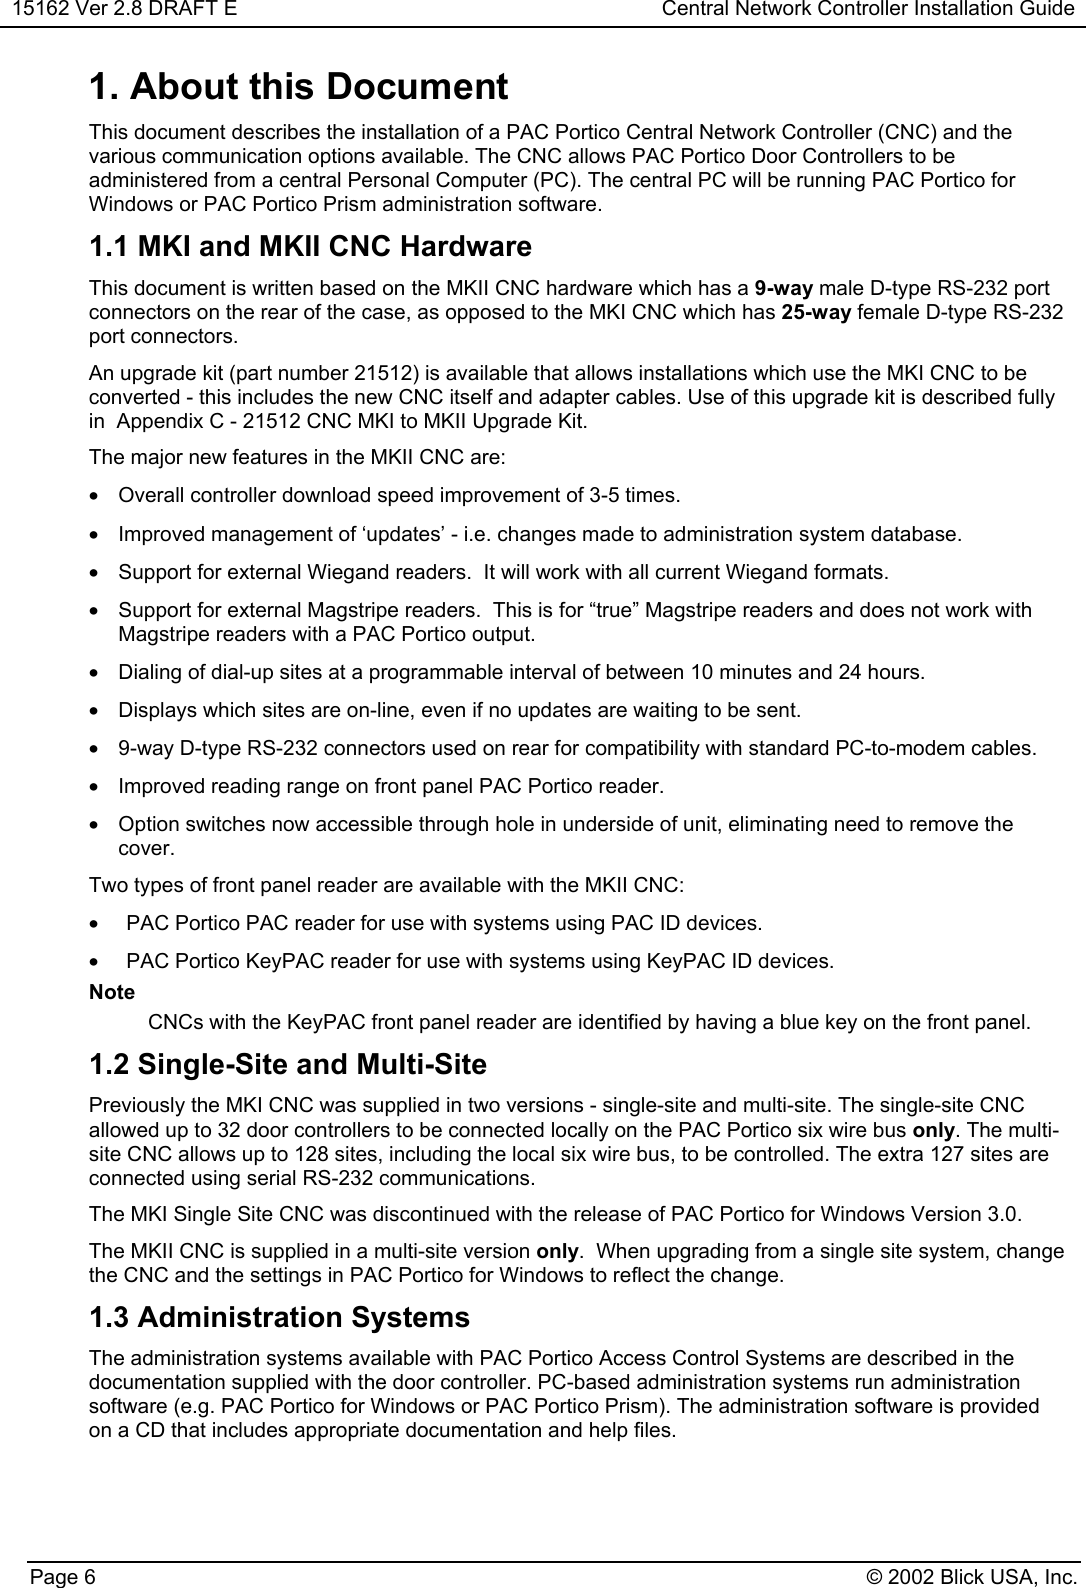 15162 Ver 2.8 DRAFT E Central Network Controller Installation GuidePage 6 © 2002 Blick USA, Inc.1. About this DocumentThis document describes the installation of a PAC Portico Central Network Controller (CNC) and thevarious communication options available. The CNC allows PAC Portico Door Controllers to beadministered from a central Personal Computer (PC). The central PC will be running PAC Portico forWindows or PAC Portico Prism administration software.1.1 MKI and MKII CNC HardwareThis document is written based on the MKII CNC hardware which has a 9-way male D-type RS-232 portconnectors on the rear of the case, as opposed to the MKI CNC which has 25-way female D-type RS-232port connectors.An upgrade kit (part number 21512) is available that allows installations which use the MKI CNC to beconverted - this includes the new CNC itself and adapter cables. Use of this upgrade kit is described fullyin  Appendix C - 21512 CNC MKI to MKII Upgrade Kit.The major new features in the MKII CNC are:•  Overall controller download speed improvement of 3-5 times.•  Improved management of ‘updates’ - i.e. changes made to administration system database.•  Support for external Wiegand readers.  It will work with all current Wiegand formats.•  Support for external Magstripe readers.  This is for “true” Magstripe readers and does not work withMagstripe readers with a PAC Portico output.•  Dialing of dial-up sites at a programmable interval of between 10 minutes and 24 hours.•  Displays which sites are on-line, even if no updates are waiting to be sent.•  9-way D-type RS-232 connectors used on rear for compatibility with standard PC-to-modem cables.•  Improved reading range on front panel PAC Portico reader.•  Option switches now accessible through hole in underside of unit, eliminating need to remove thecover.Two types of front panel reader are available with the MKII CNC:•  PAC Portico PAC reader for use with systems using PAC ID devices.•  PAC Portico KeyPAC reader for use with systems using KeyPAC ID devices.NoteCNCs with the KeyPAC front panel reader are identified by having a blue key on the front panel.1.2 Single-Site and Multi-SitePreviously the MKI CNC was supplied in two versions - single-site and multi-site. The single-site CNCallowed up to 32 door controllers to be connected locally on the PAC Portico six wire bus only. The multi-site CNC allows up to 128 sites, including the local six wire bus, to be controlled. The extra 127 sites areconnected using serial RS-232 communications.The MKI Single Site CNC was discontinued with the release of PAC Portico for Windows Version 3.0.The MKII CNC is supplied in a multi-site version only.  When upgrading from a single site system, changethe CNC and the settings in PAC Portico for Windows to reflect the change.1.3 Administration SystemsThe administration systems available with PAC Portico Access Control Systems are described in thedocumentation supplied with the door controller. PC-based administration systems run administrationsoftware (e.g. PAC Portico for Windows or PAC Portico Prism). The administration software is providedon a CD that includes appropriate documentation and help files.